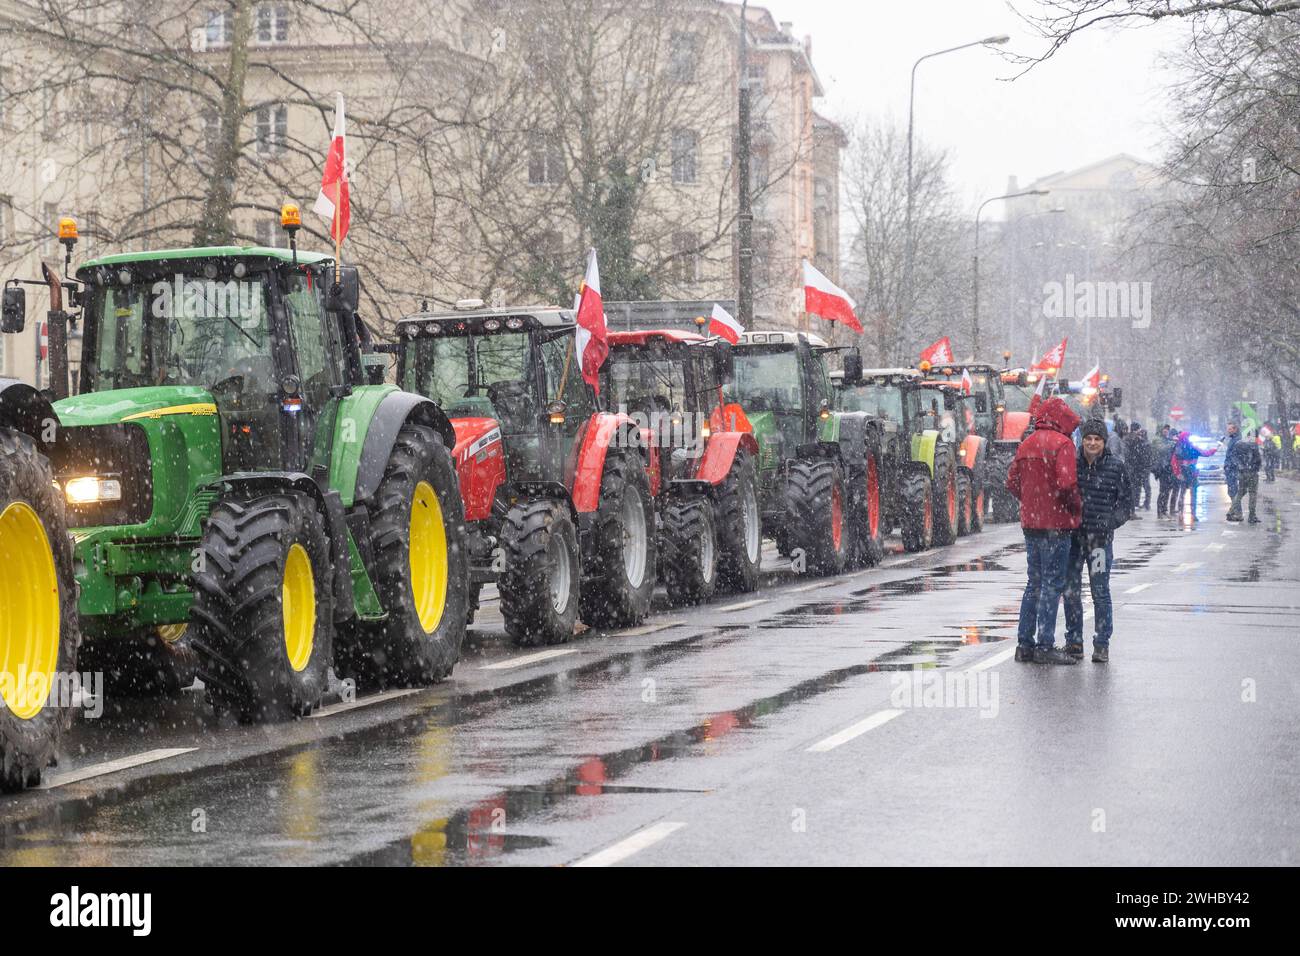 Tractors of Polish farmers slow down traffic in the town Poznan. Around 3k tractors took part in the protest against the inflow of agricultural products into the European Union from Ukraine Farmers protest in Poznan, Poland, February 9, 2024 Copyright: xMarekxAntonixIwanczukx MAI05833 Stock Photo